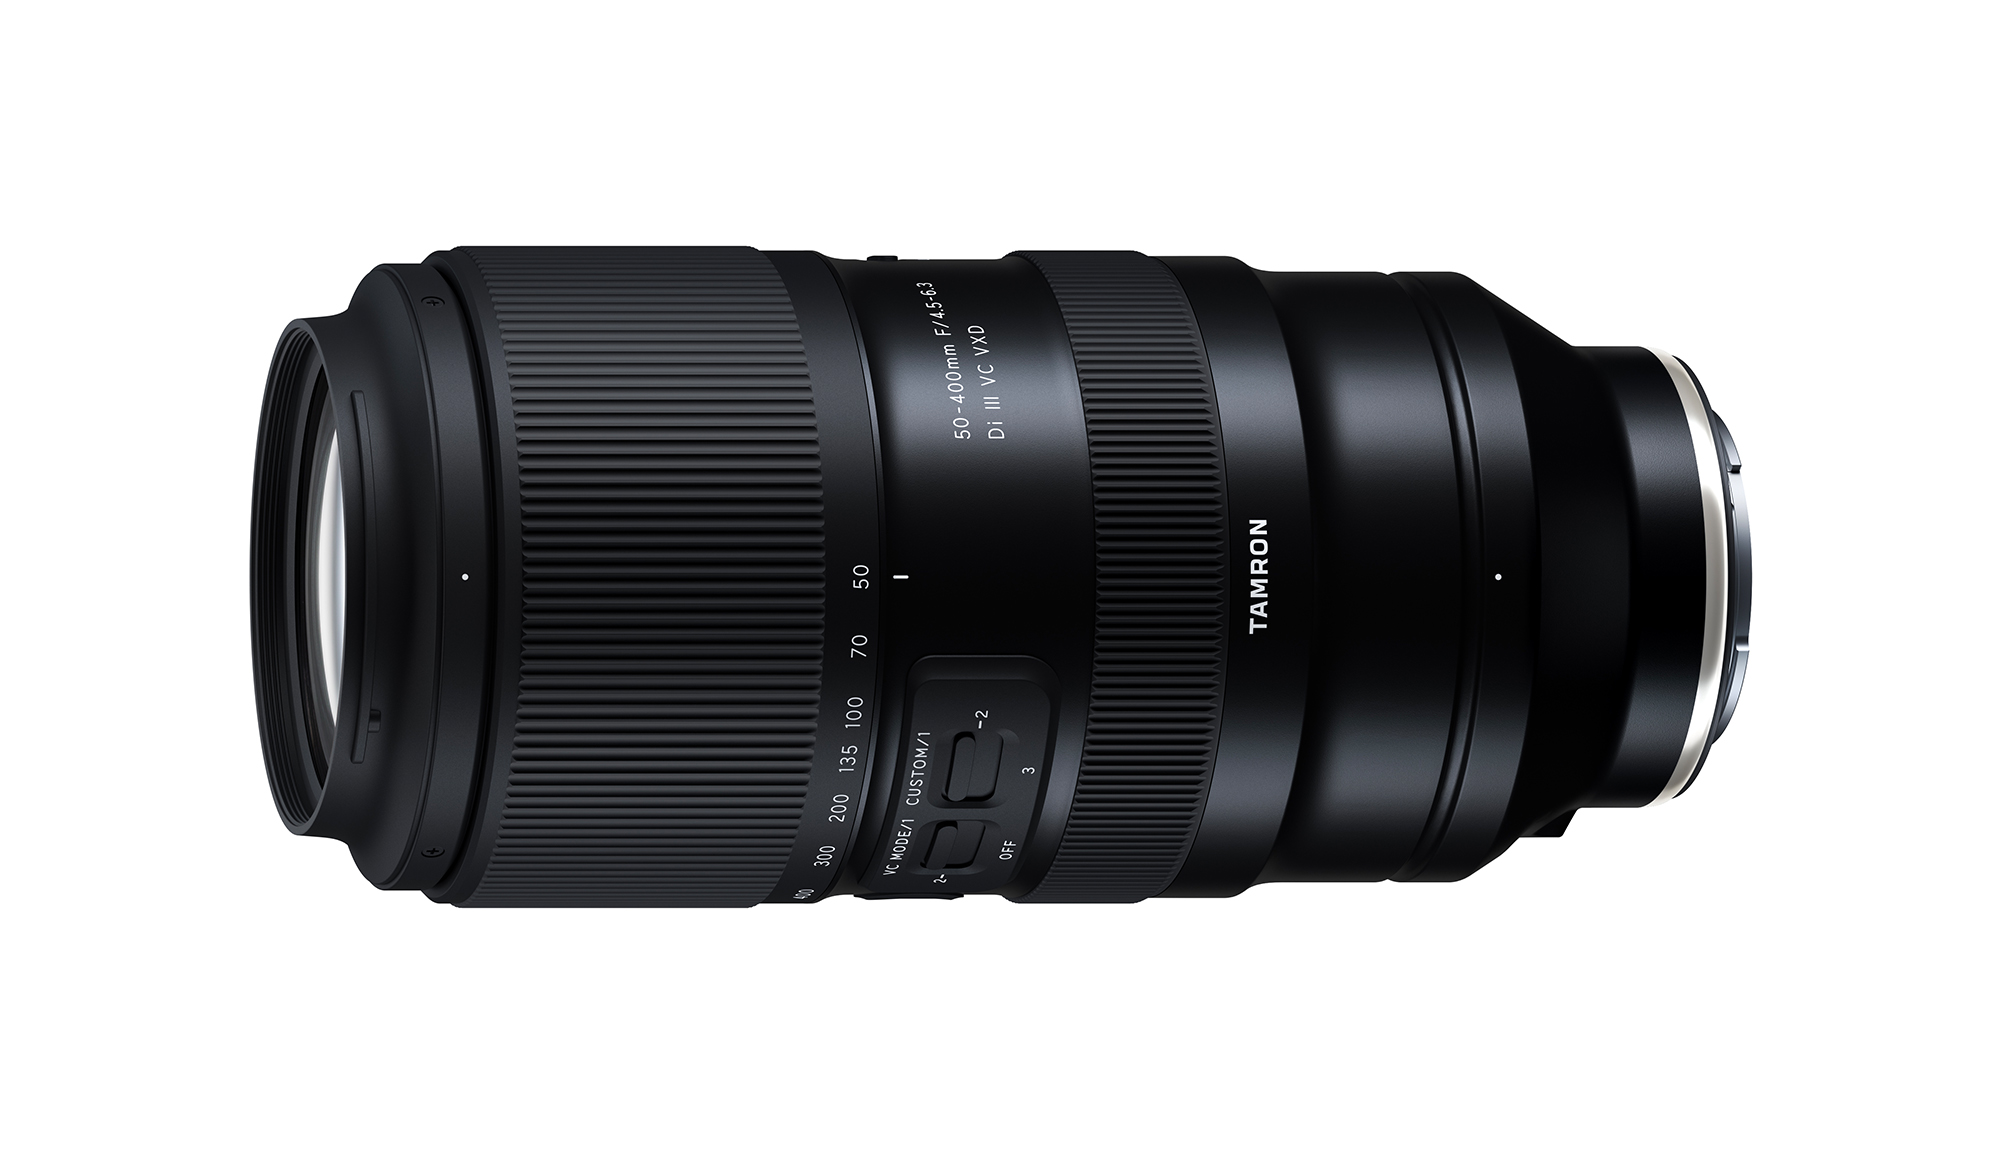 TAMRON 50-400mm F/4.5-6.3 Di III VC VXD Full-Frame for Sony E-mount  Announced